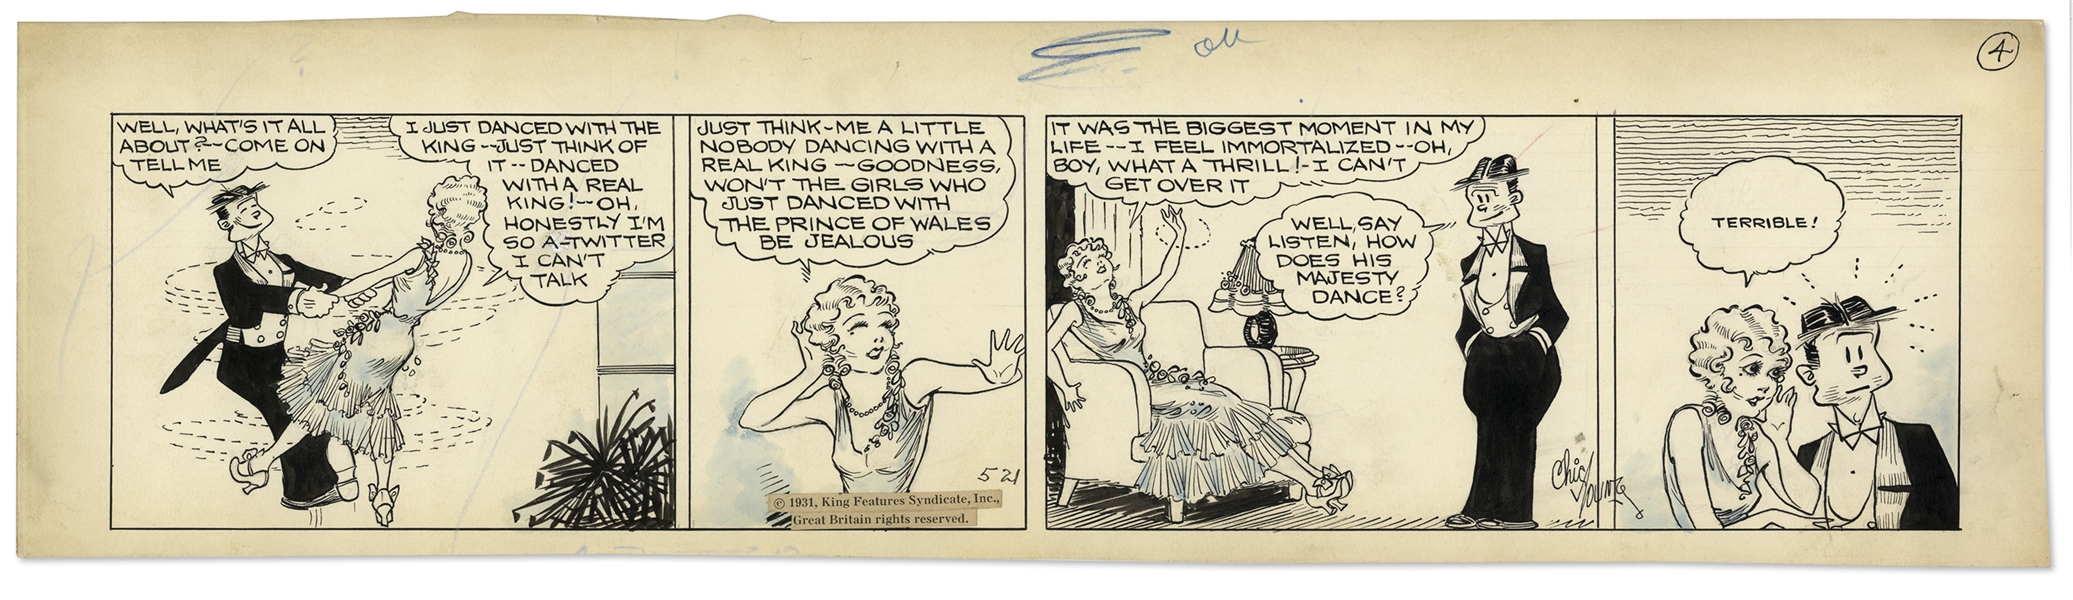 Chic Young Hand-Drawn ''Blondie'' Comic Strip From 1931 Titled ''On Her Toes'' -- Blondie Dances With Edward VIII, the Prince of Wales